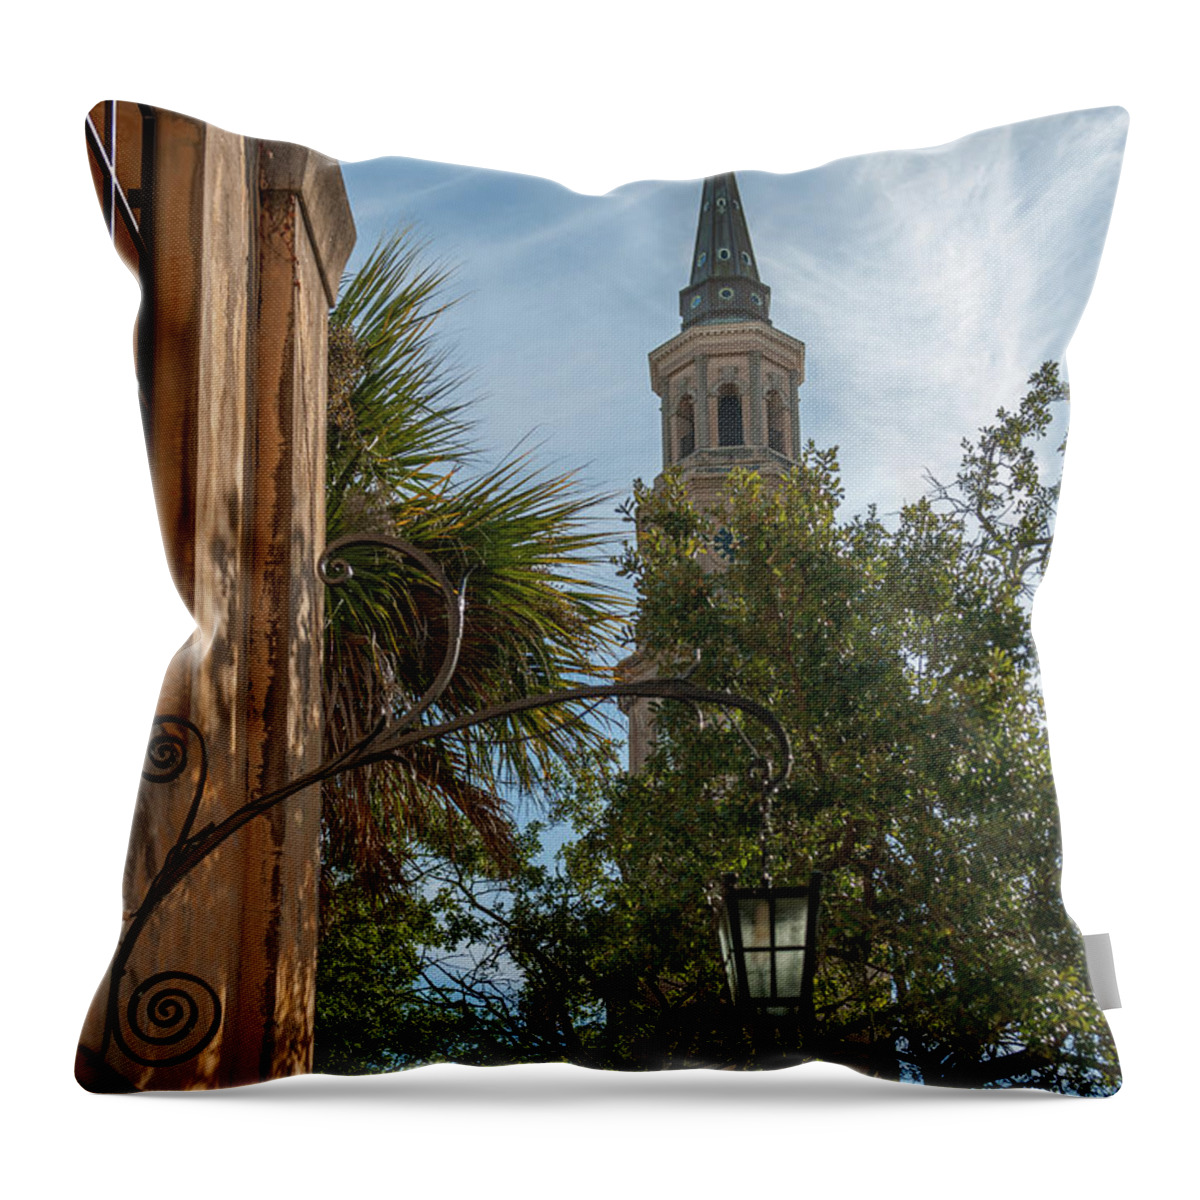 Lamp Throw Pillow featuring the photograph Charleston - St. Phillip's Church by Dale Powell